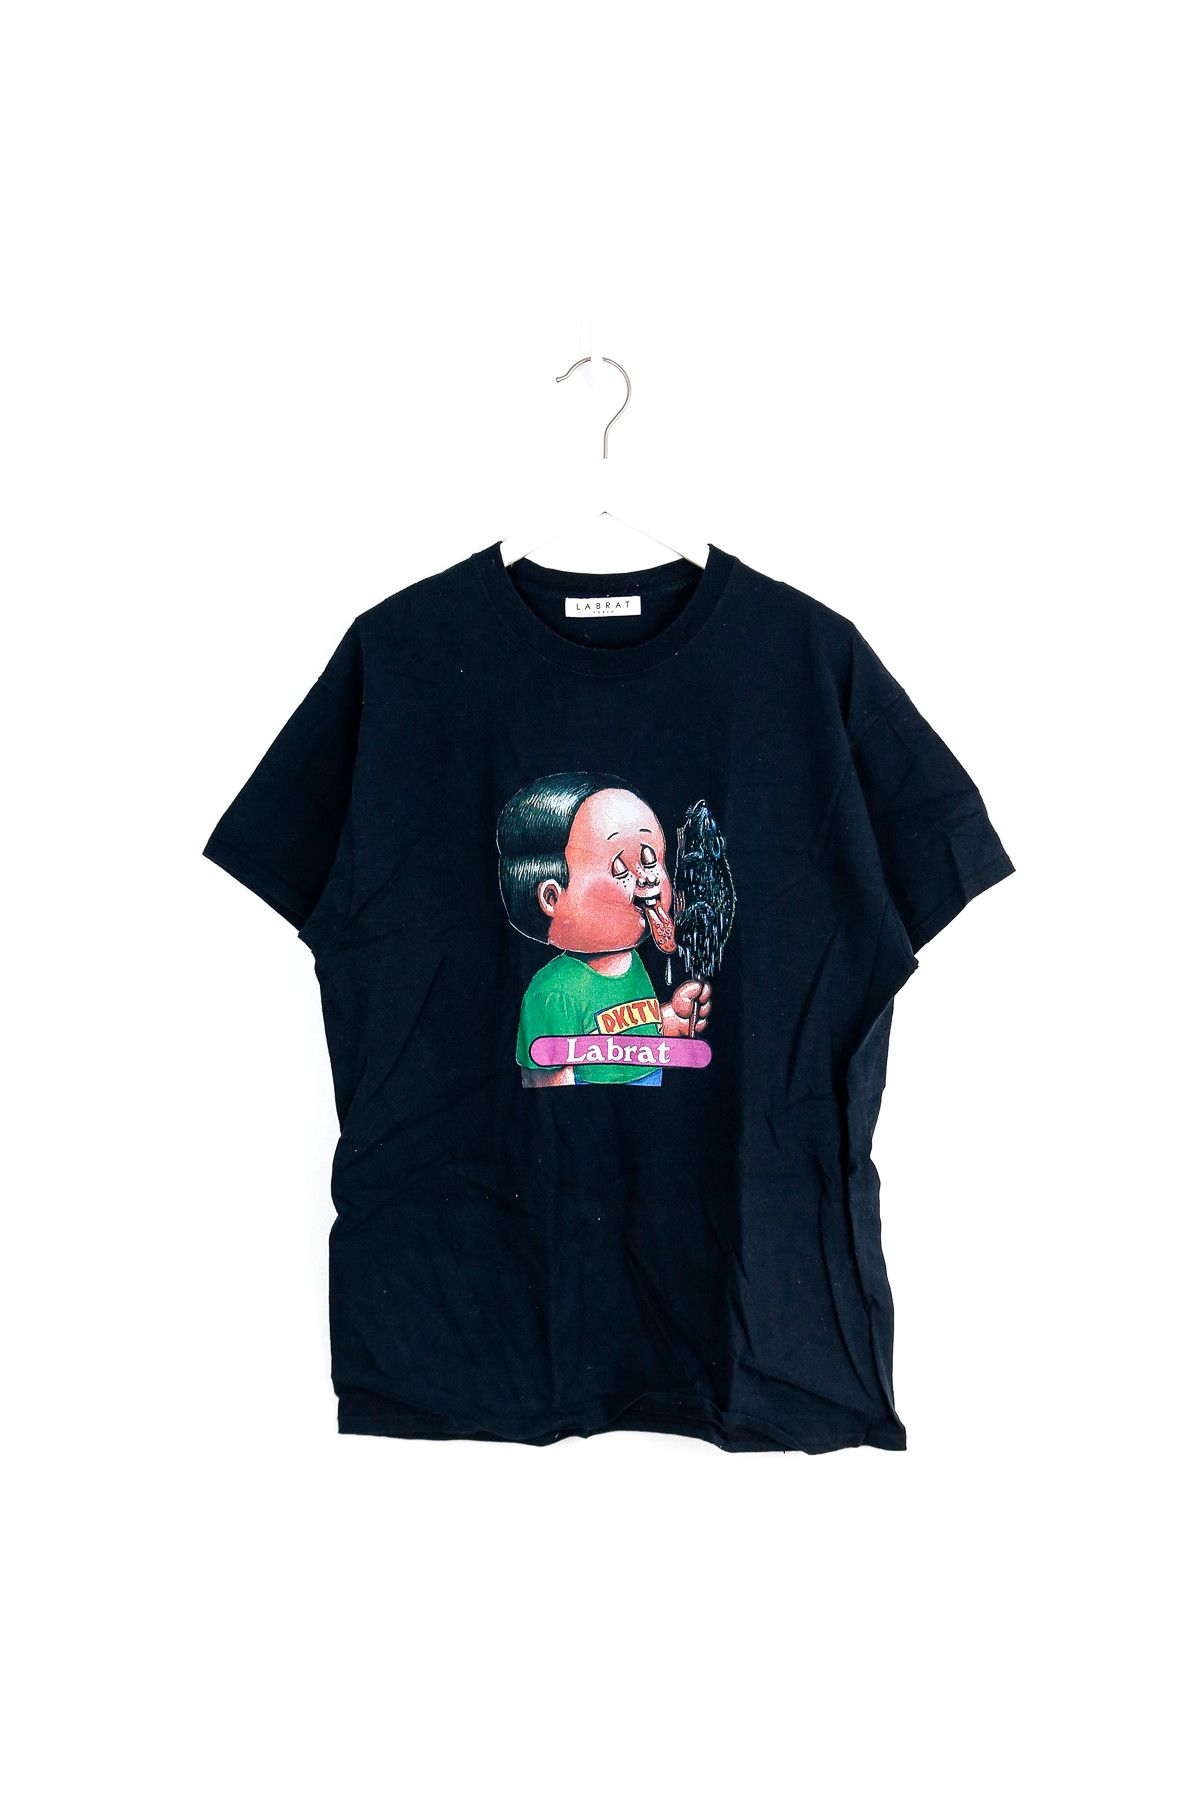 Labrat **CHARITY DONATION** Garbage Pail Kids Tee | Grailed